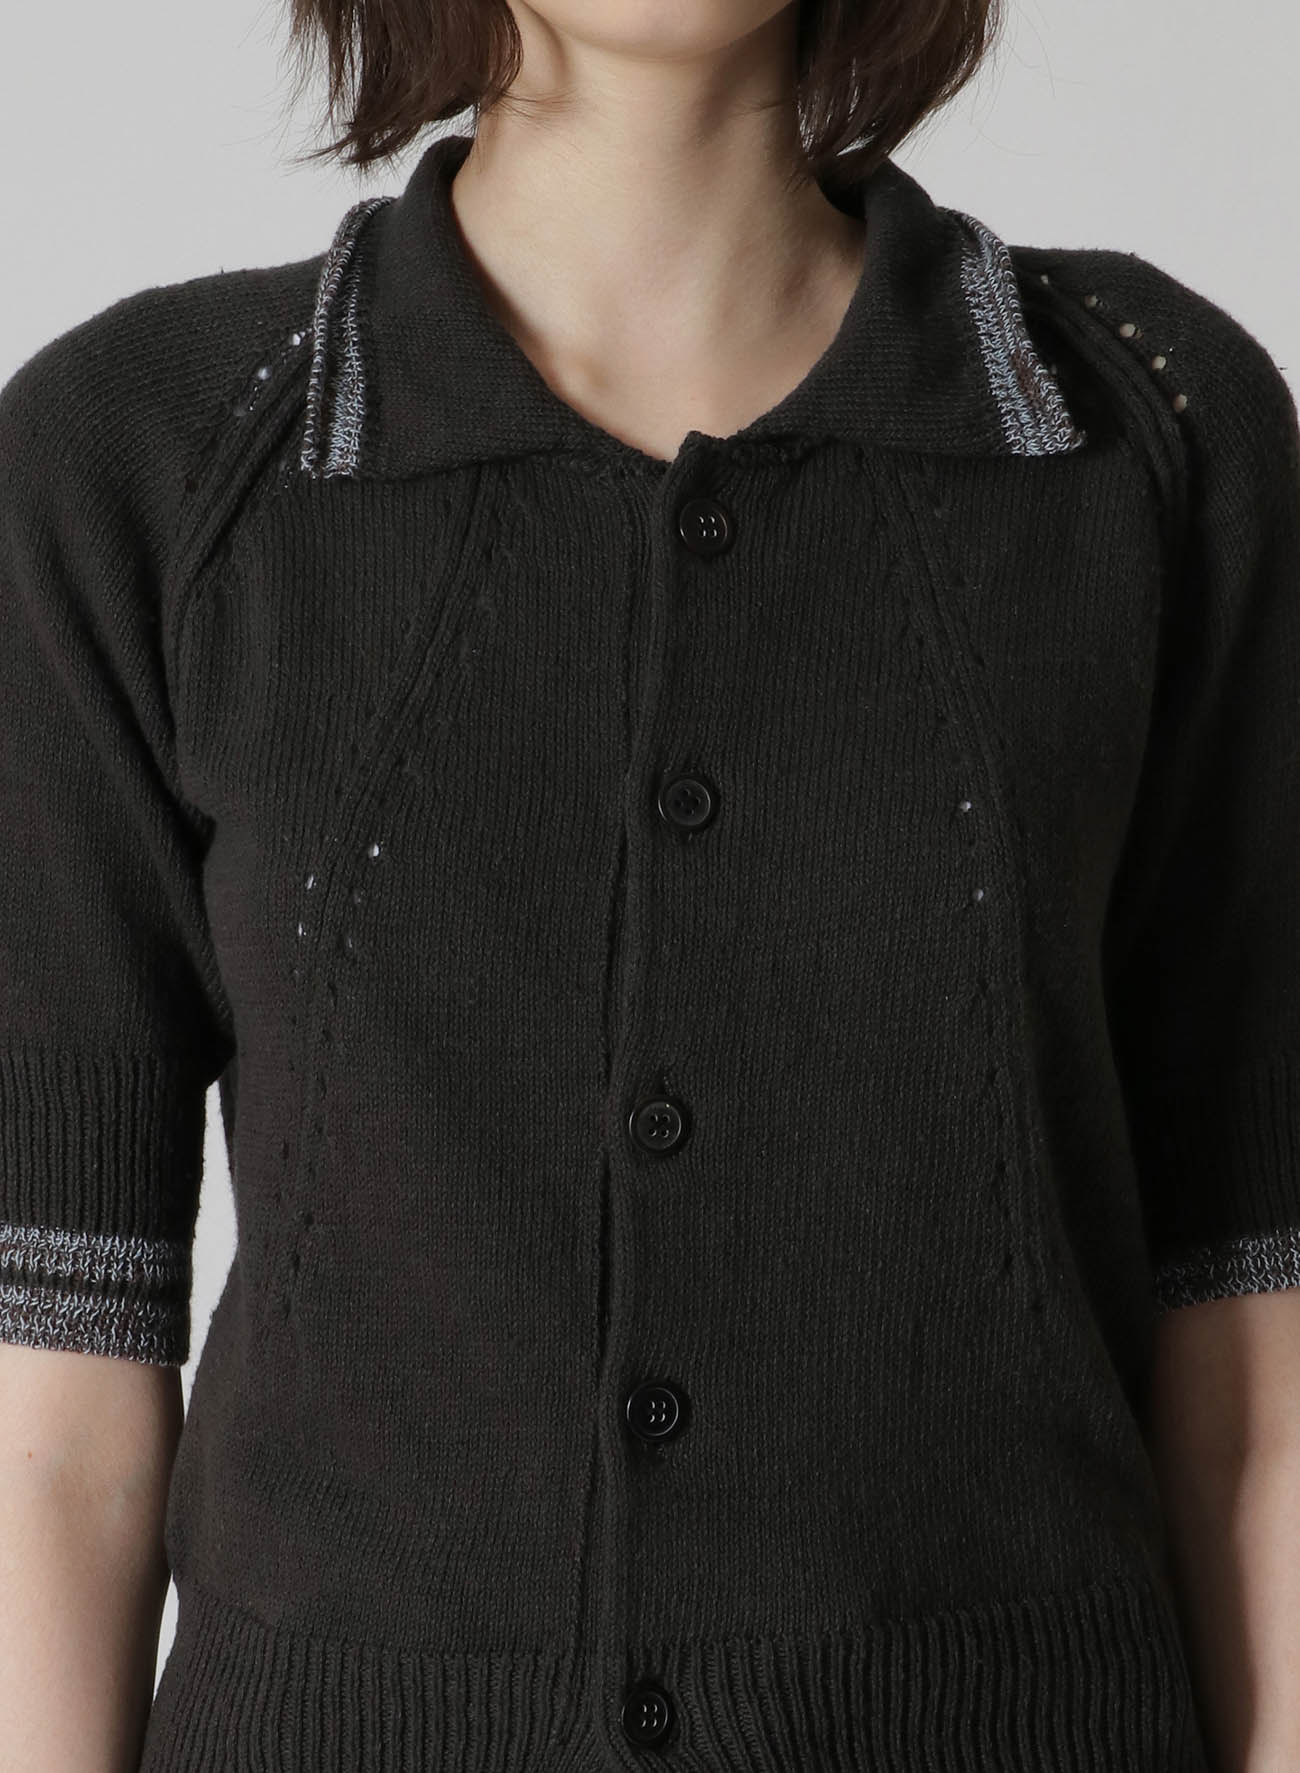 PLAIN STITCH CARDIGAN WITH HOLE DETAILS AND ASYMMETRIC COLLAR/SLEEVES